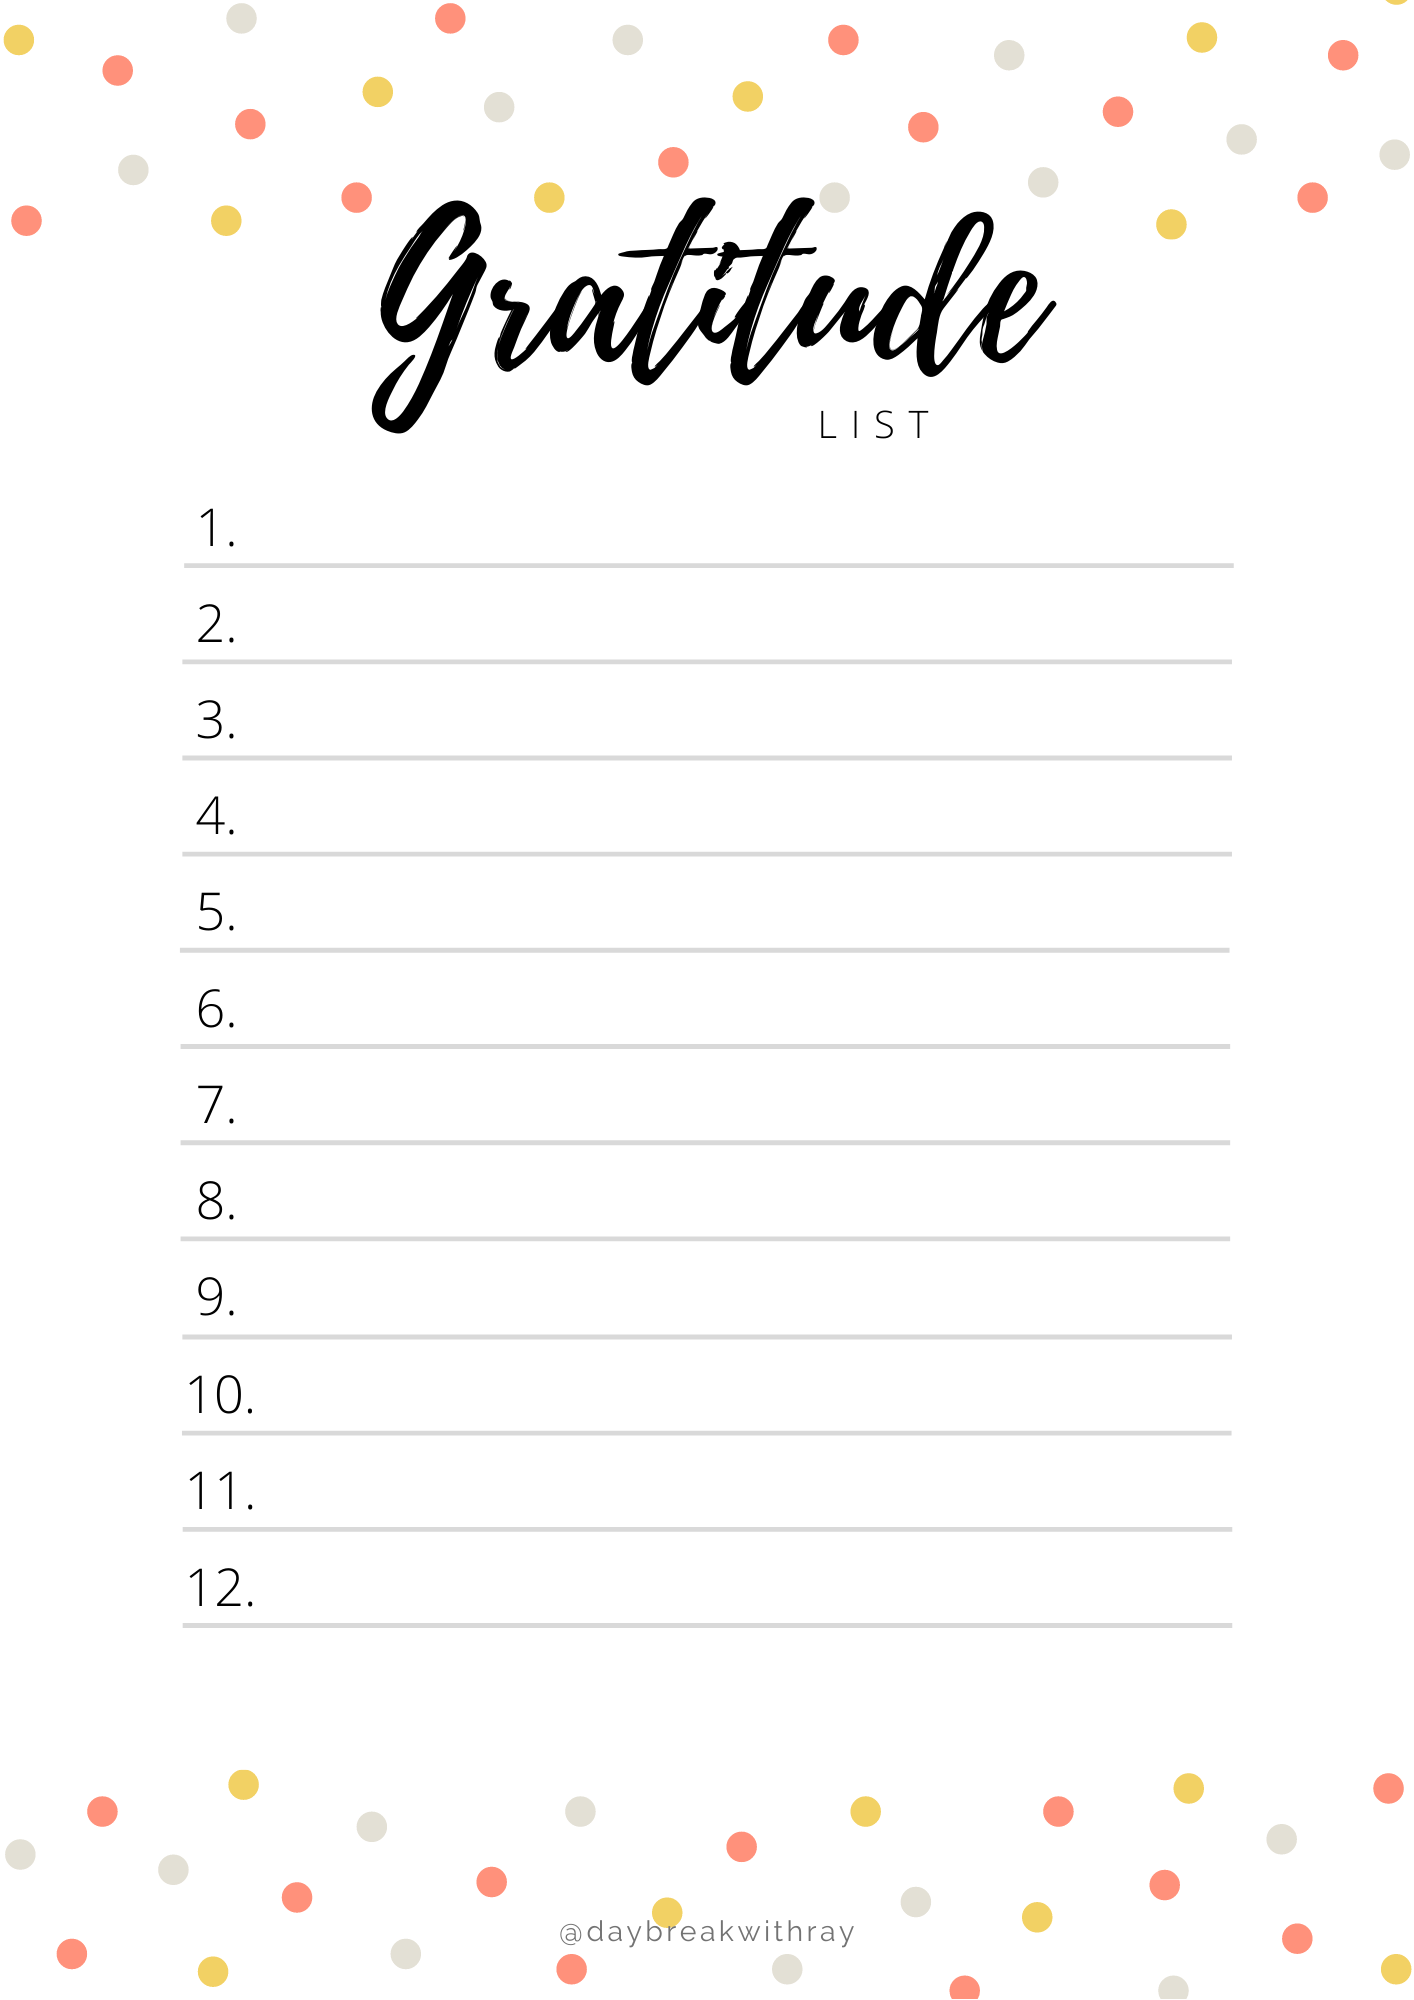 4 Genuine Benefits of Writing a Gratitude List - Daybreak with Ray